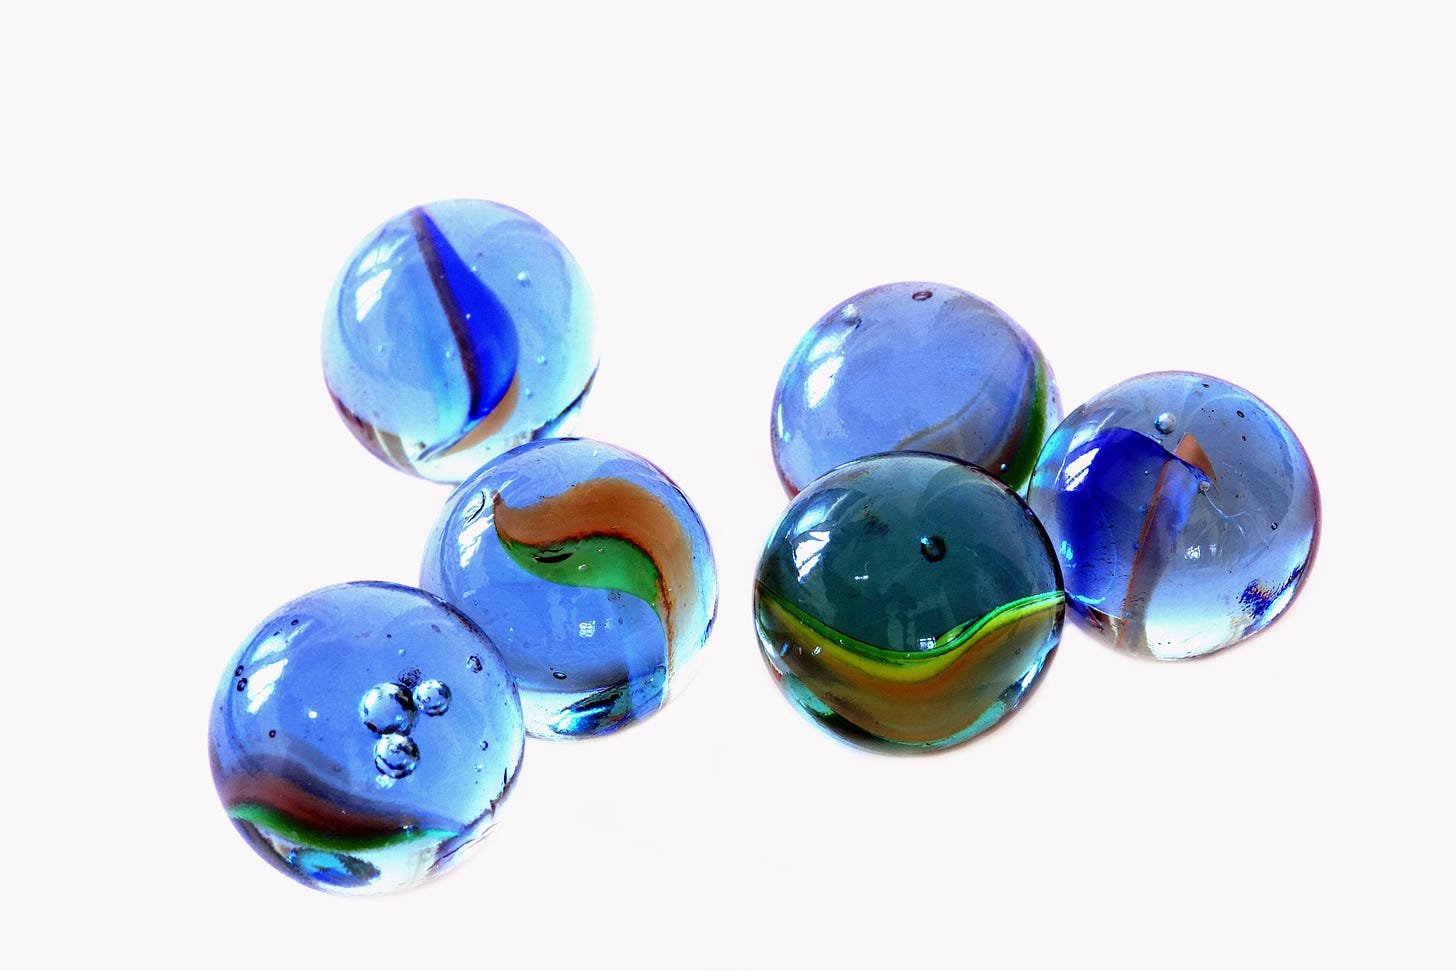 Six blue marbles are shown close-up against a white background